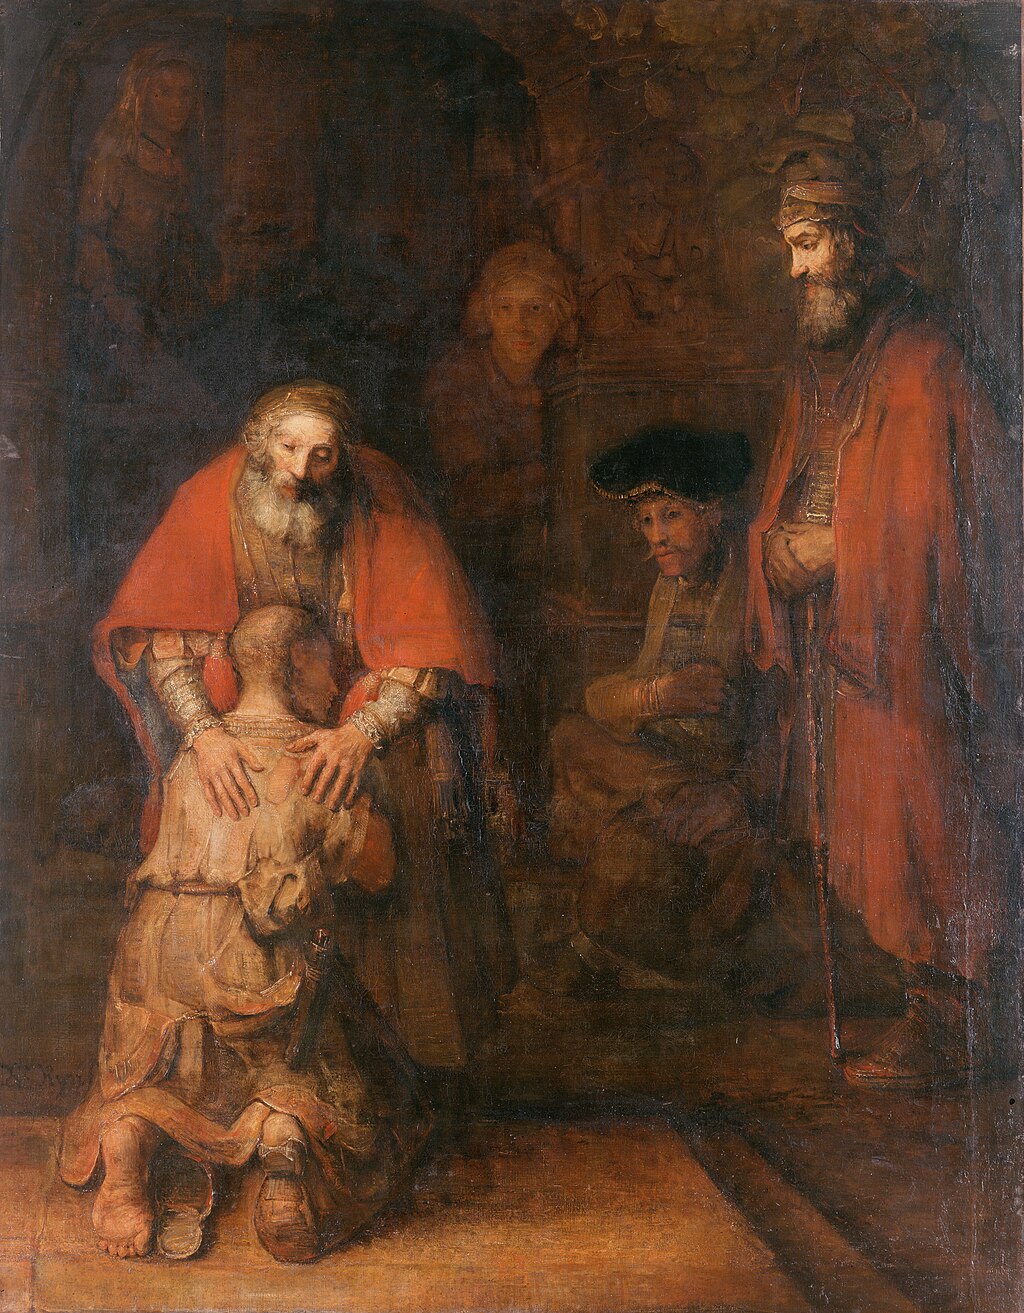 The Prodigal Son - Rembrant